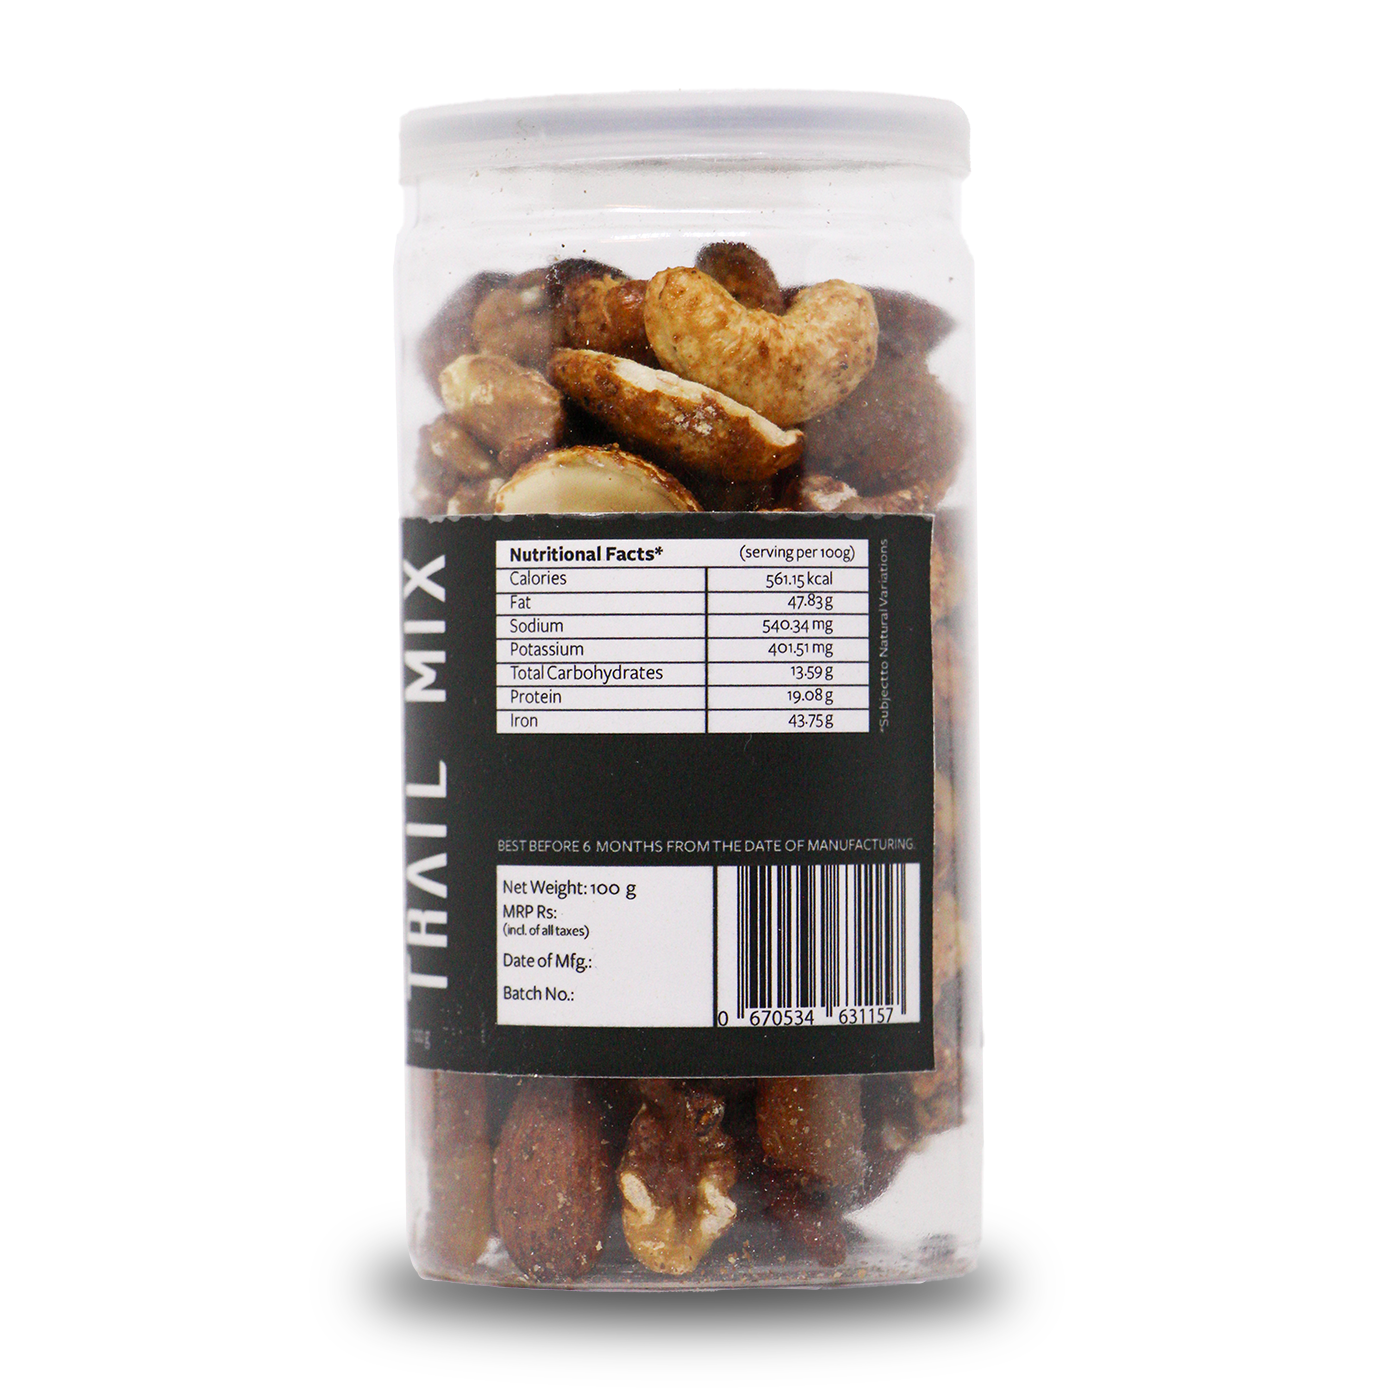 Nutty Yogi Mood Boosters (Mood Booster Tea-50 g, Very Berry Trail Mix-100 g, Cacao Nibs-100 g, Hot Chocolate-100 g)